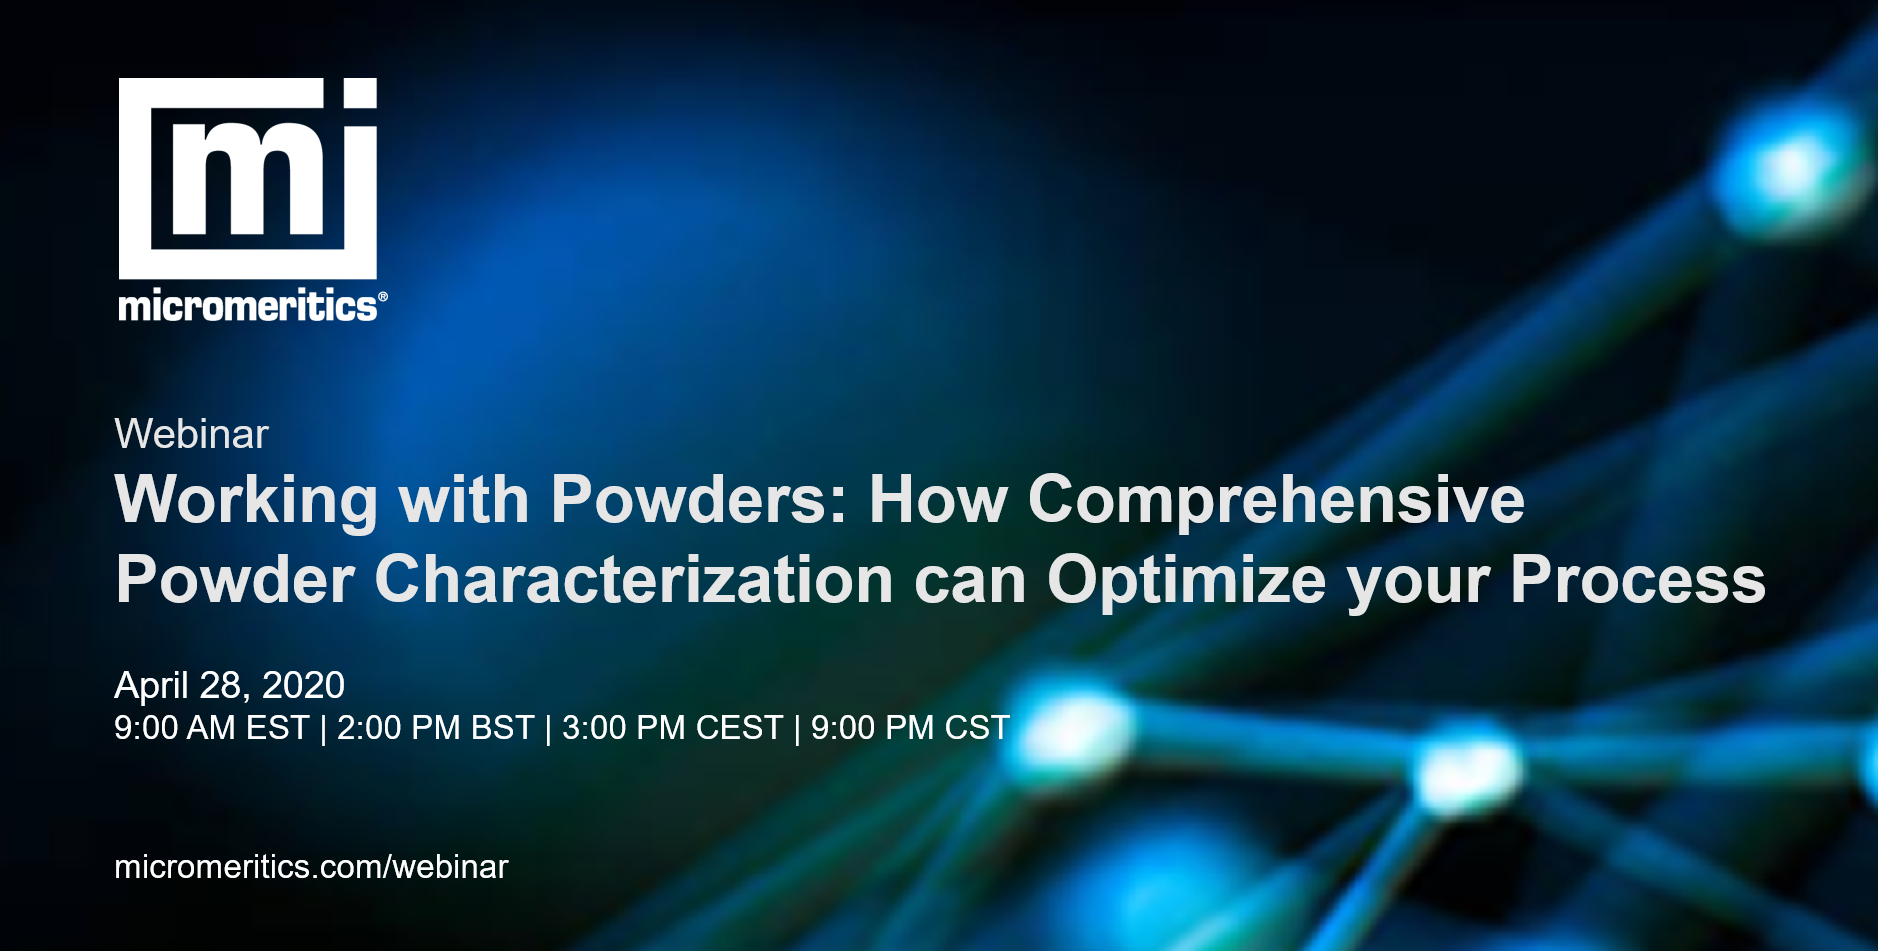 Working with powders webinar now available on demand